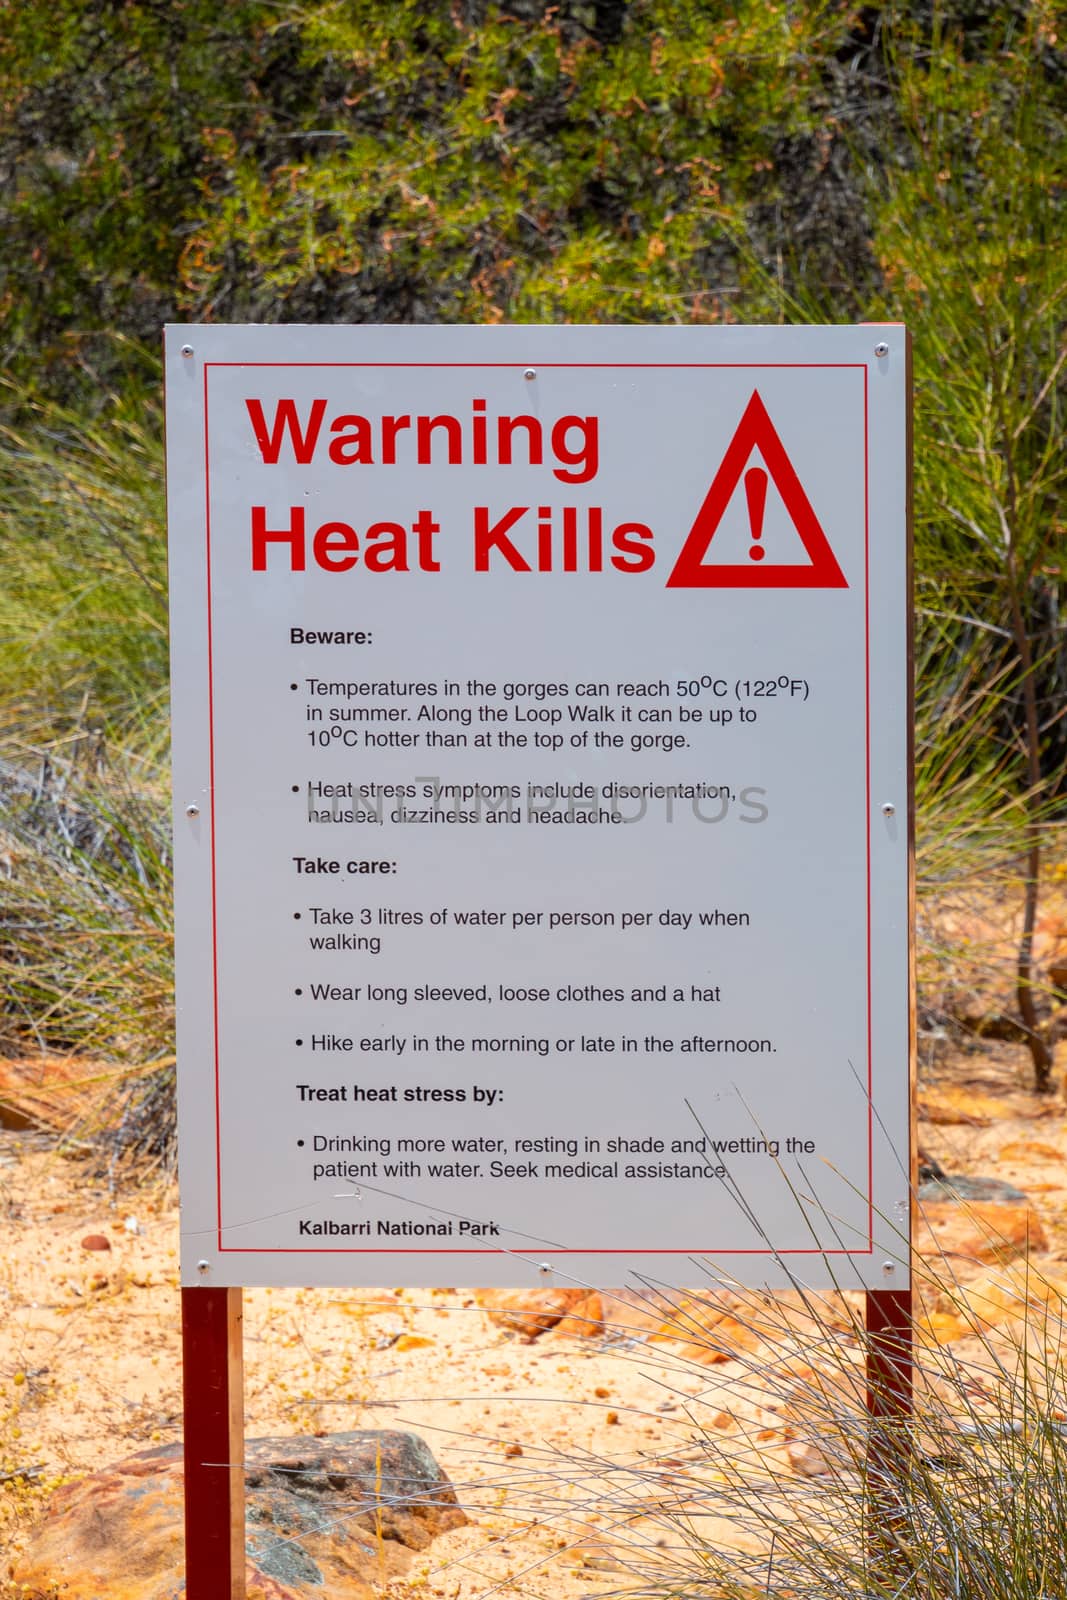 Warning Heat Kills sign warning about the extreme heat in Australian Outback